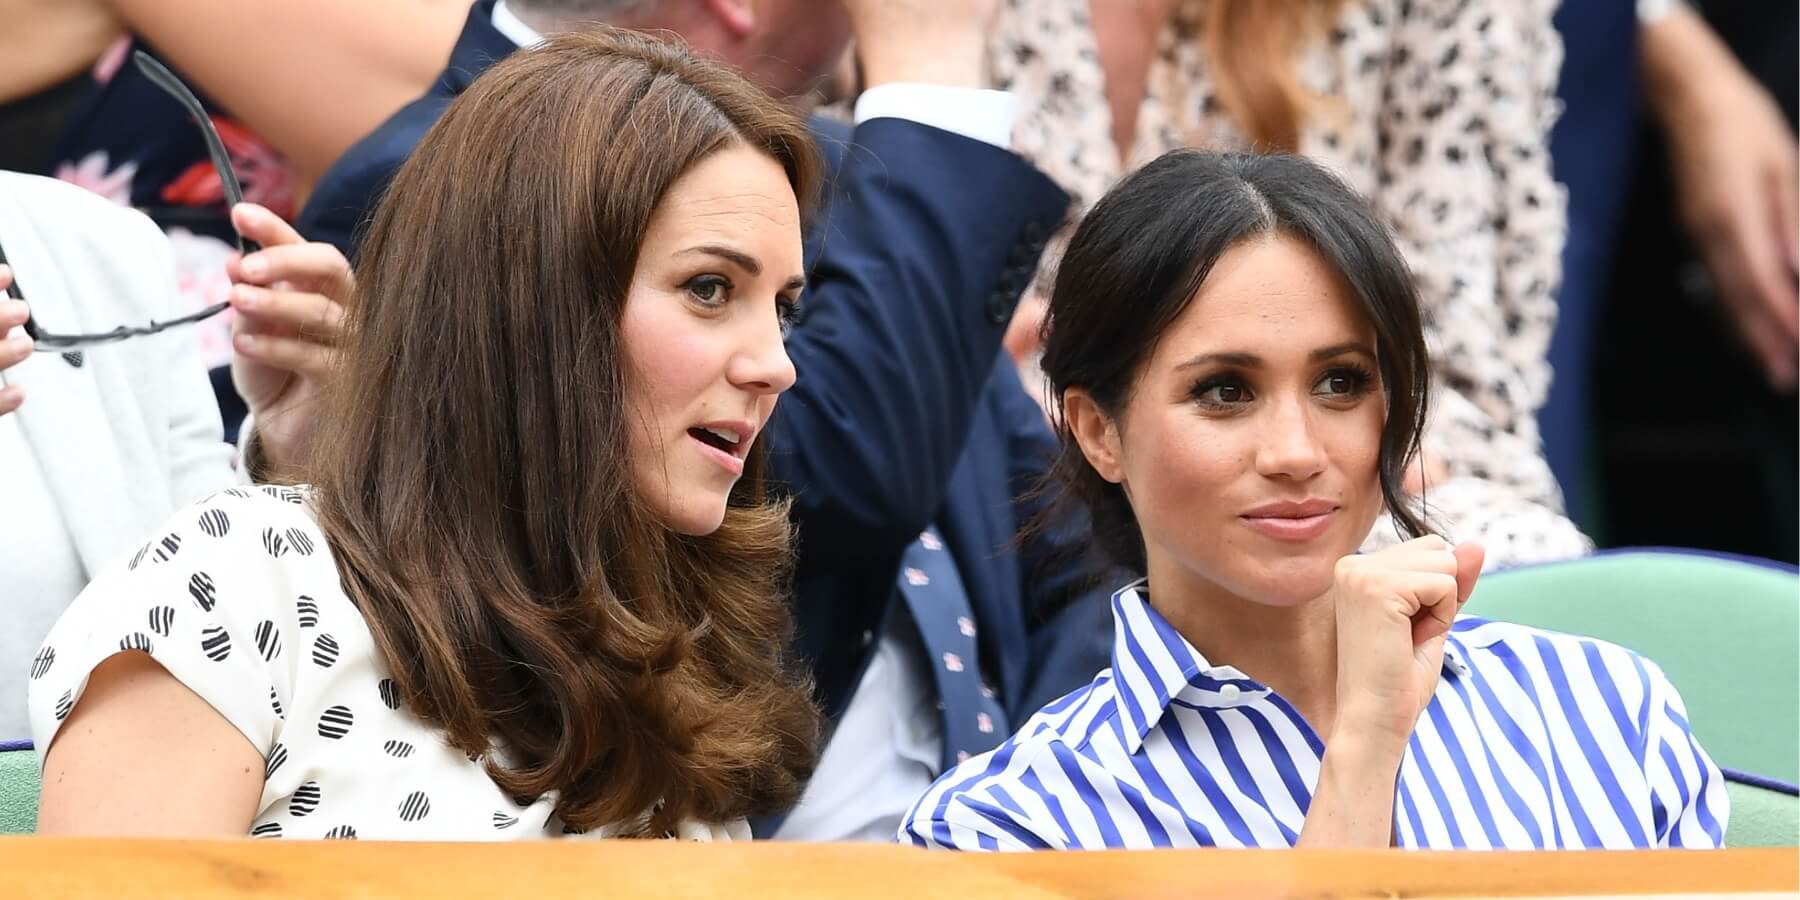 Kate Middleton and Meghan Markle reportedly never really hit it off despite public outings such as a 2018 Wimbledon match.